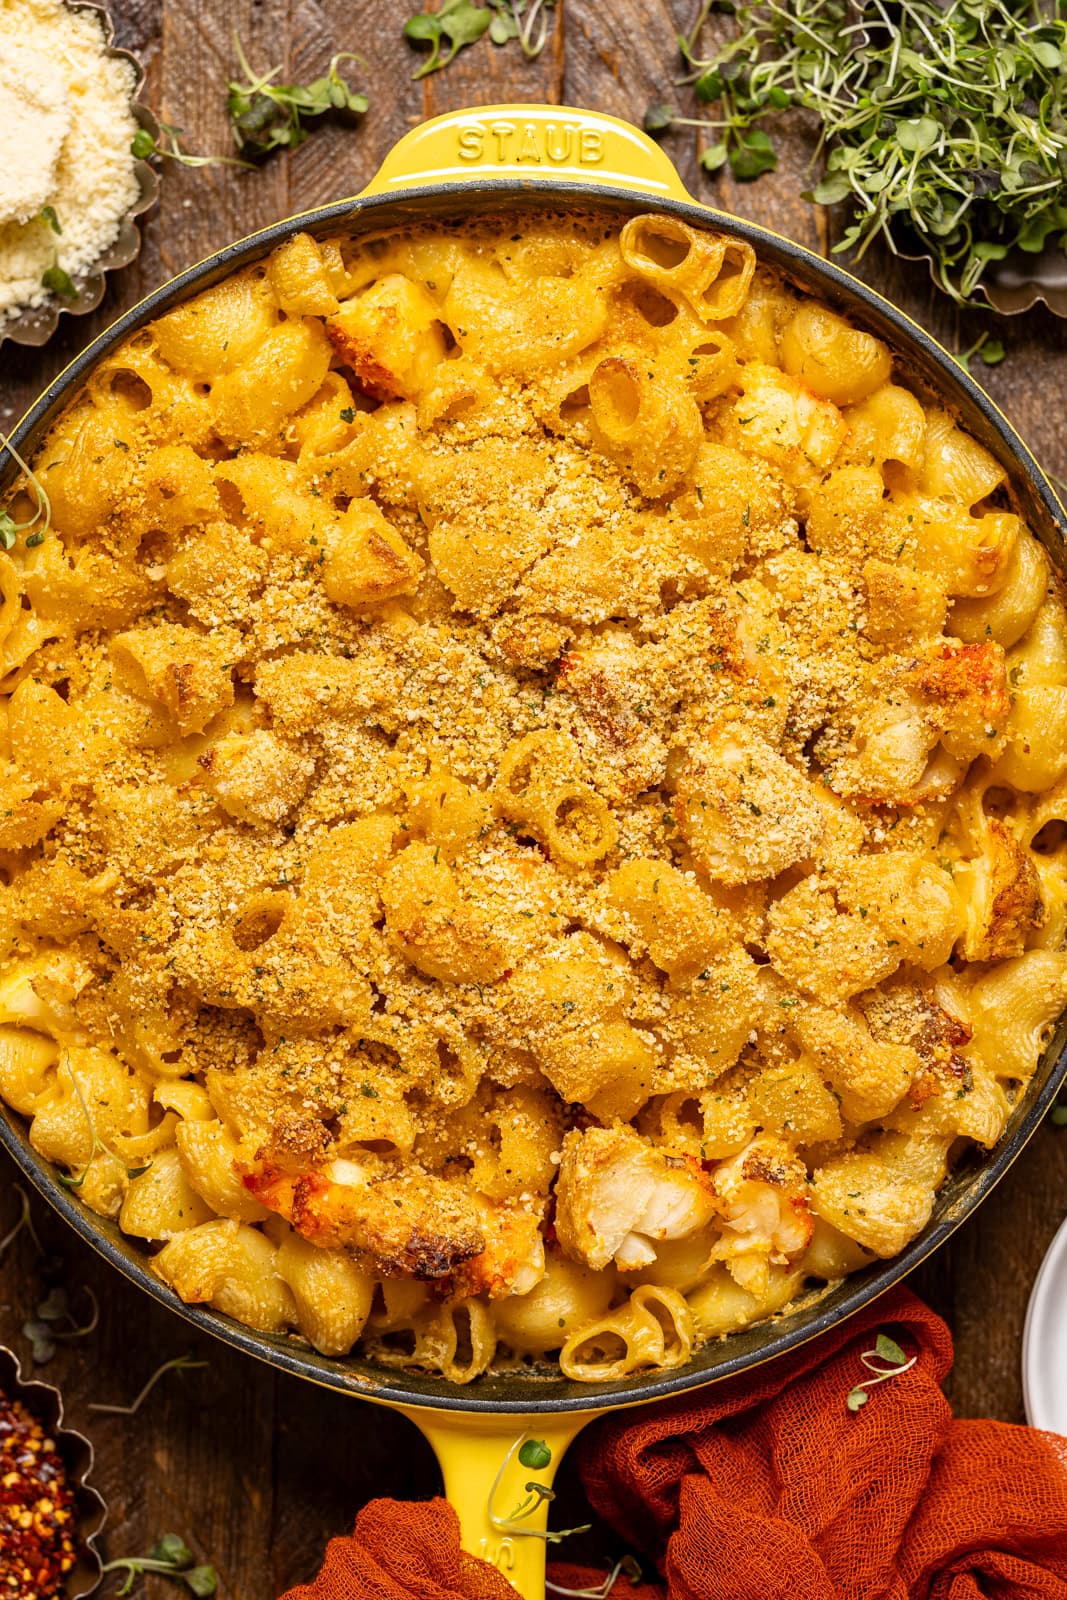 Baked lobster mac and cheese in a yellow skillet on a brown wood table.